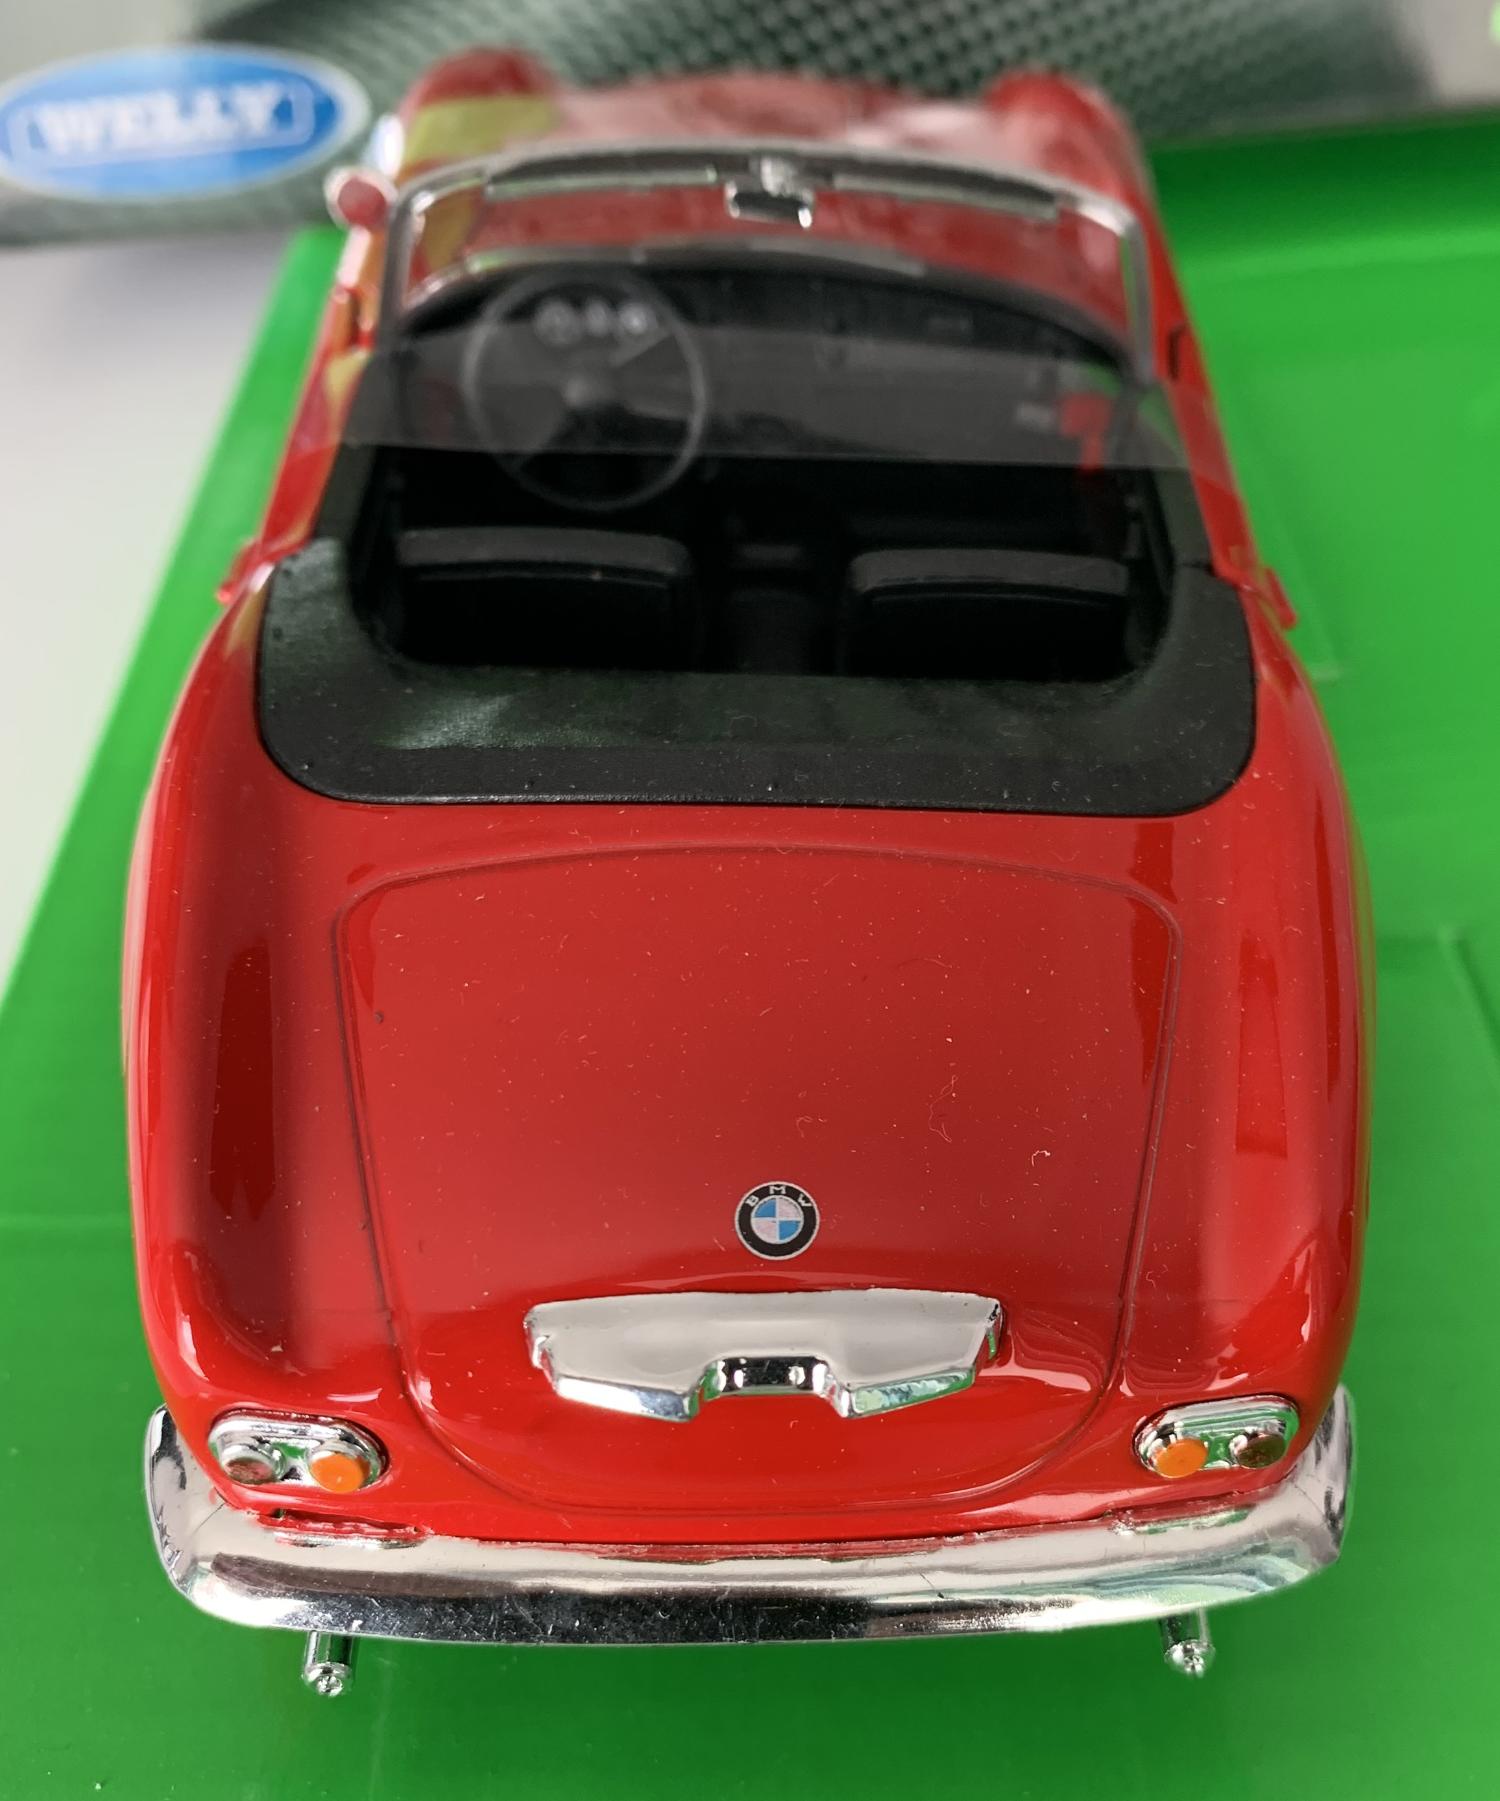 BMW 507  convertible open  top, in red 1:24 scale model from Welly